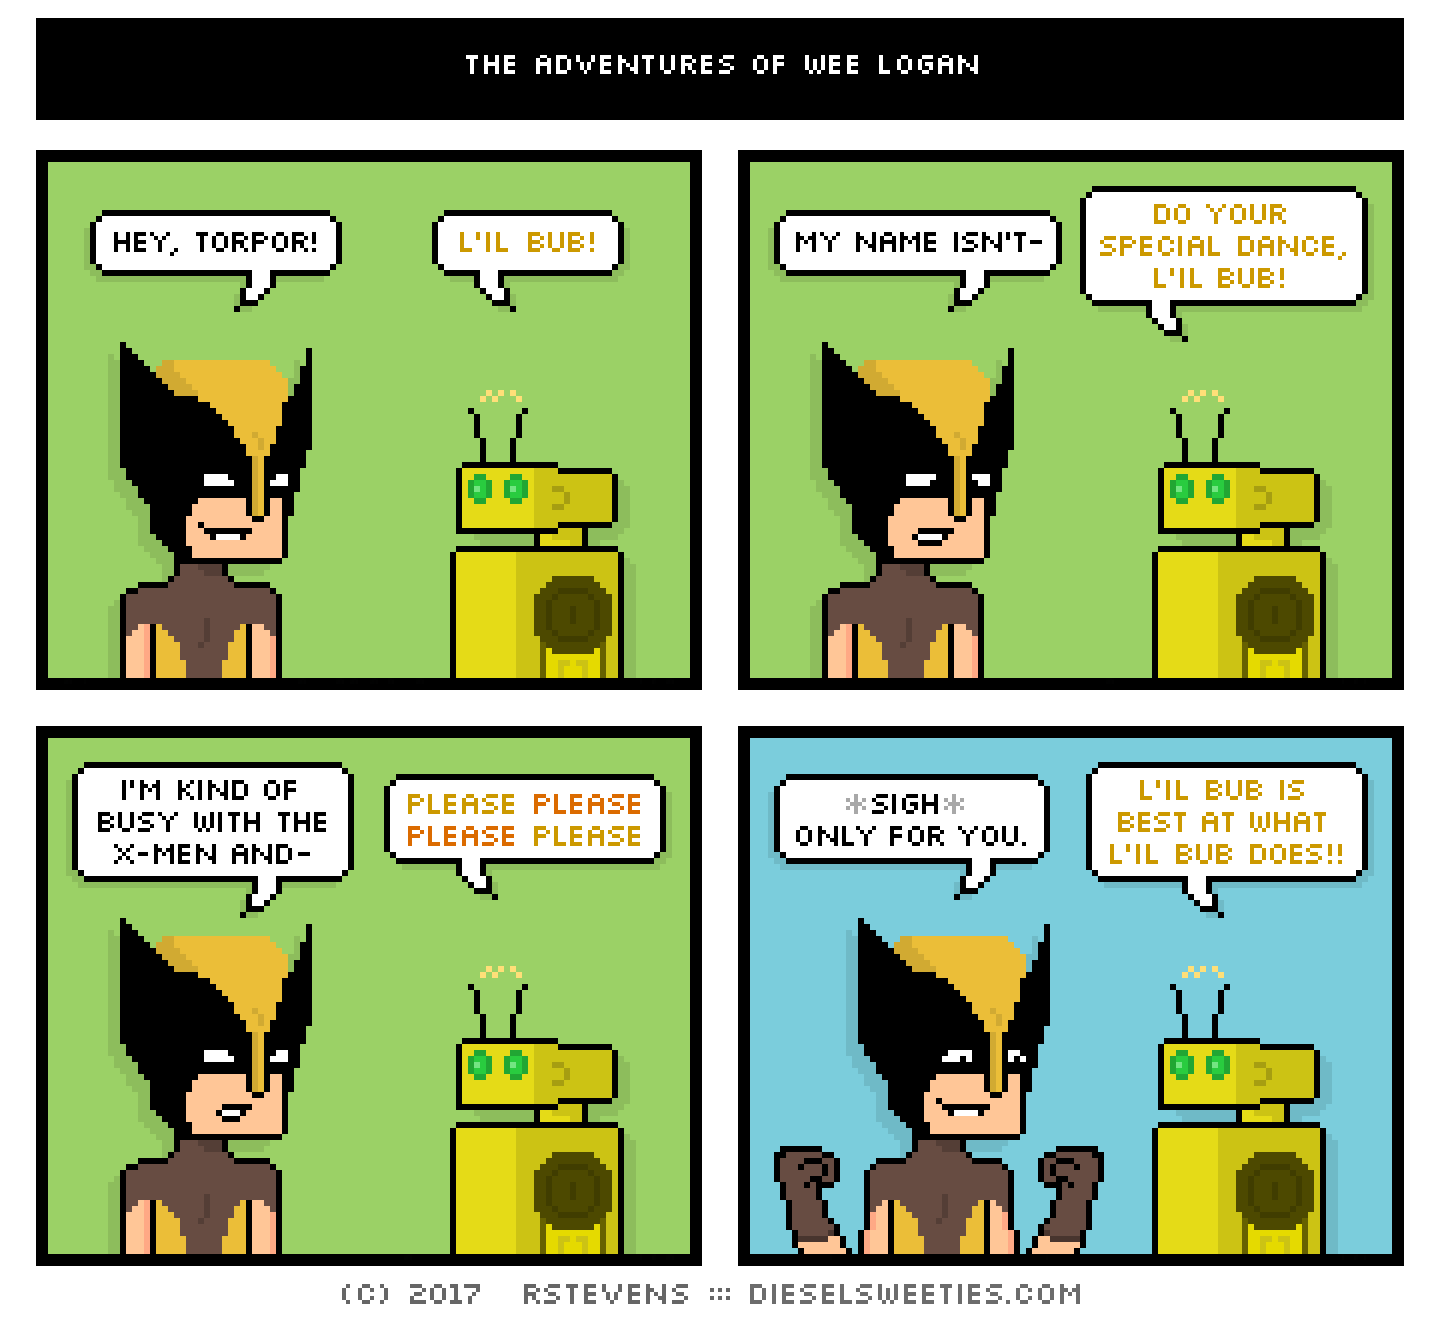 wolverine, torpor, gif : hey, torpor! l'il bub! my name isn't- do your special dance, l'il bub! i'm kind of busy with the x-men and- please please please please *sigh* only for you. l'il bub is best at what l'il bub does!!